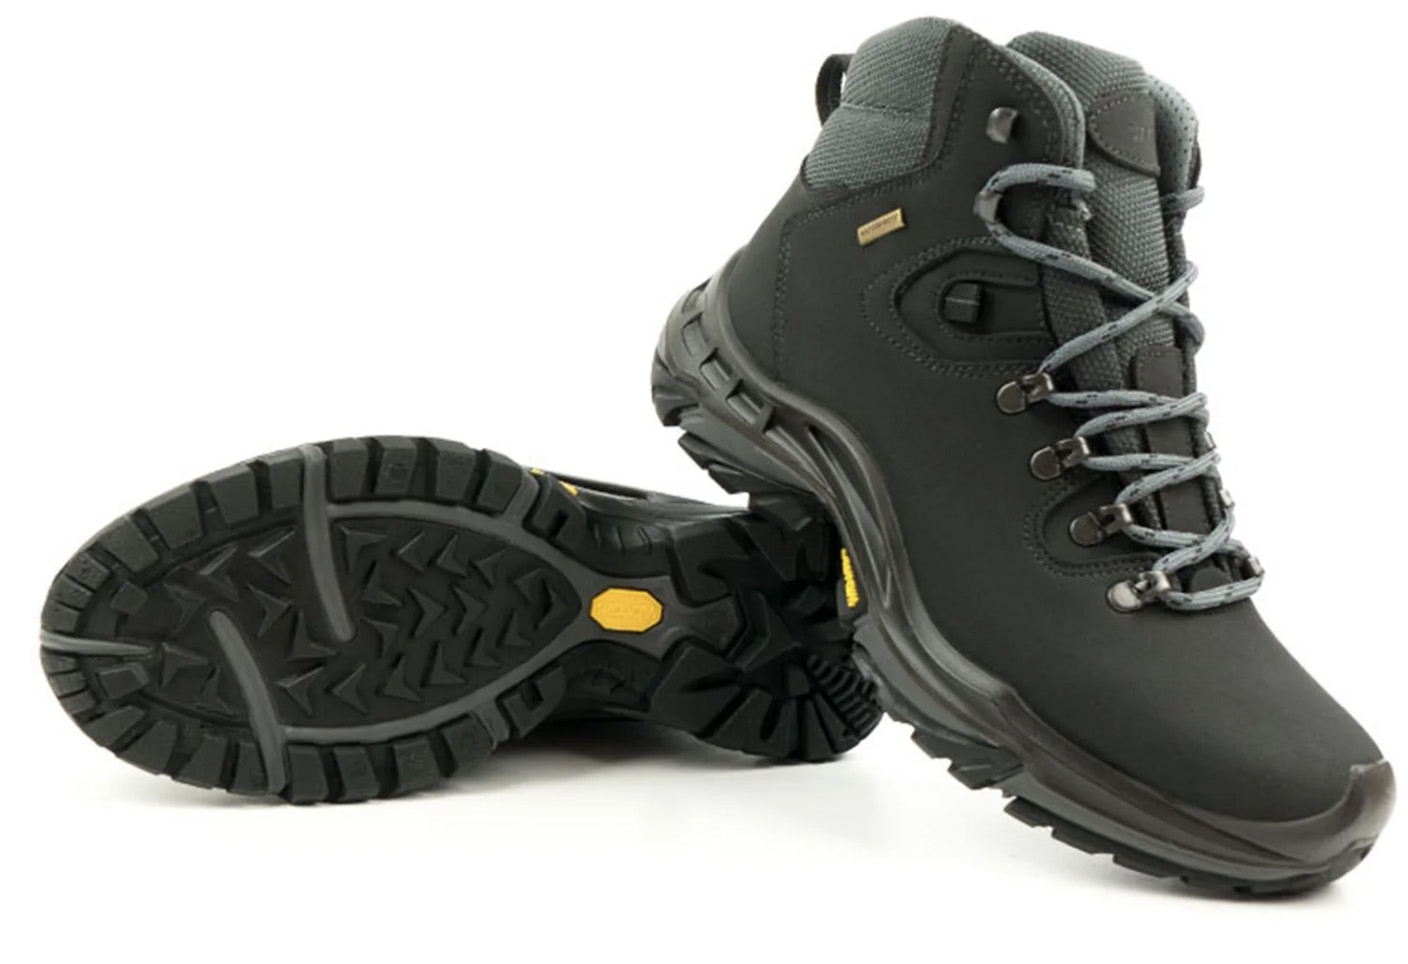 smart black men's hiking boots - a product image on white background